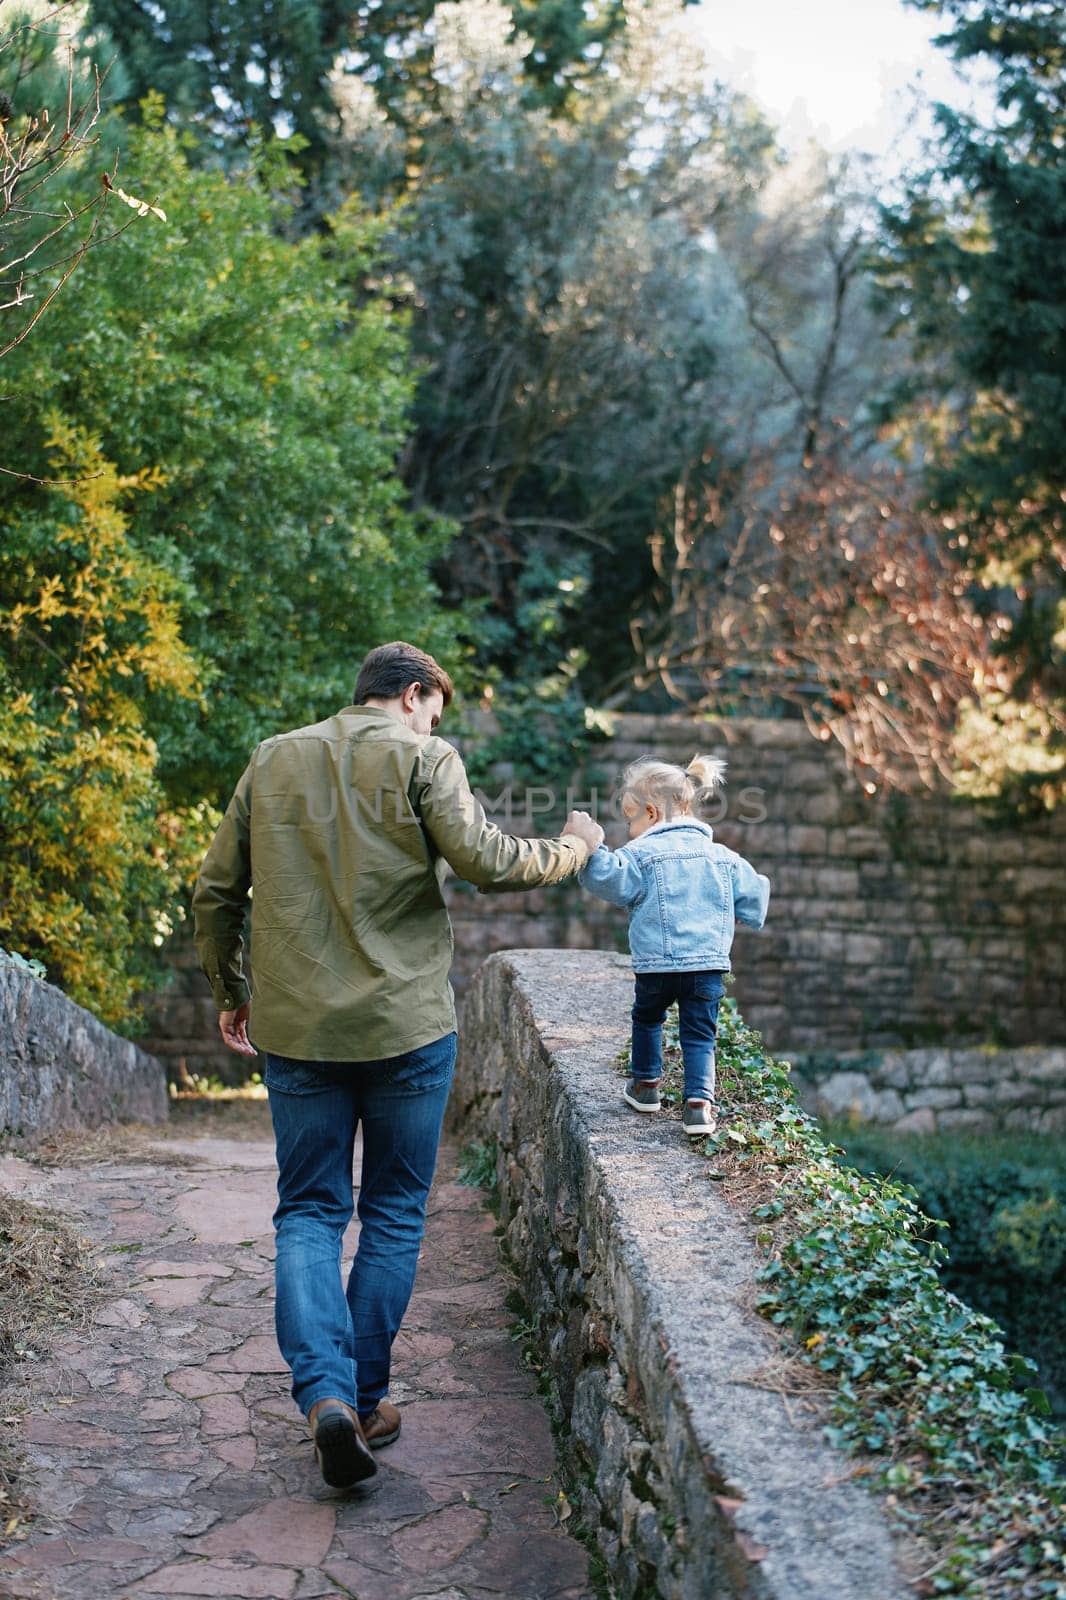 Dad leads a little girl by the hand along a stone fence walking along a paved path in the park. Back view by Nadtochiy